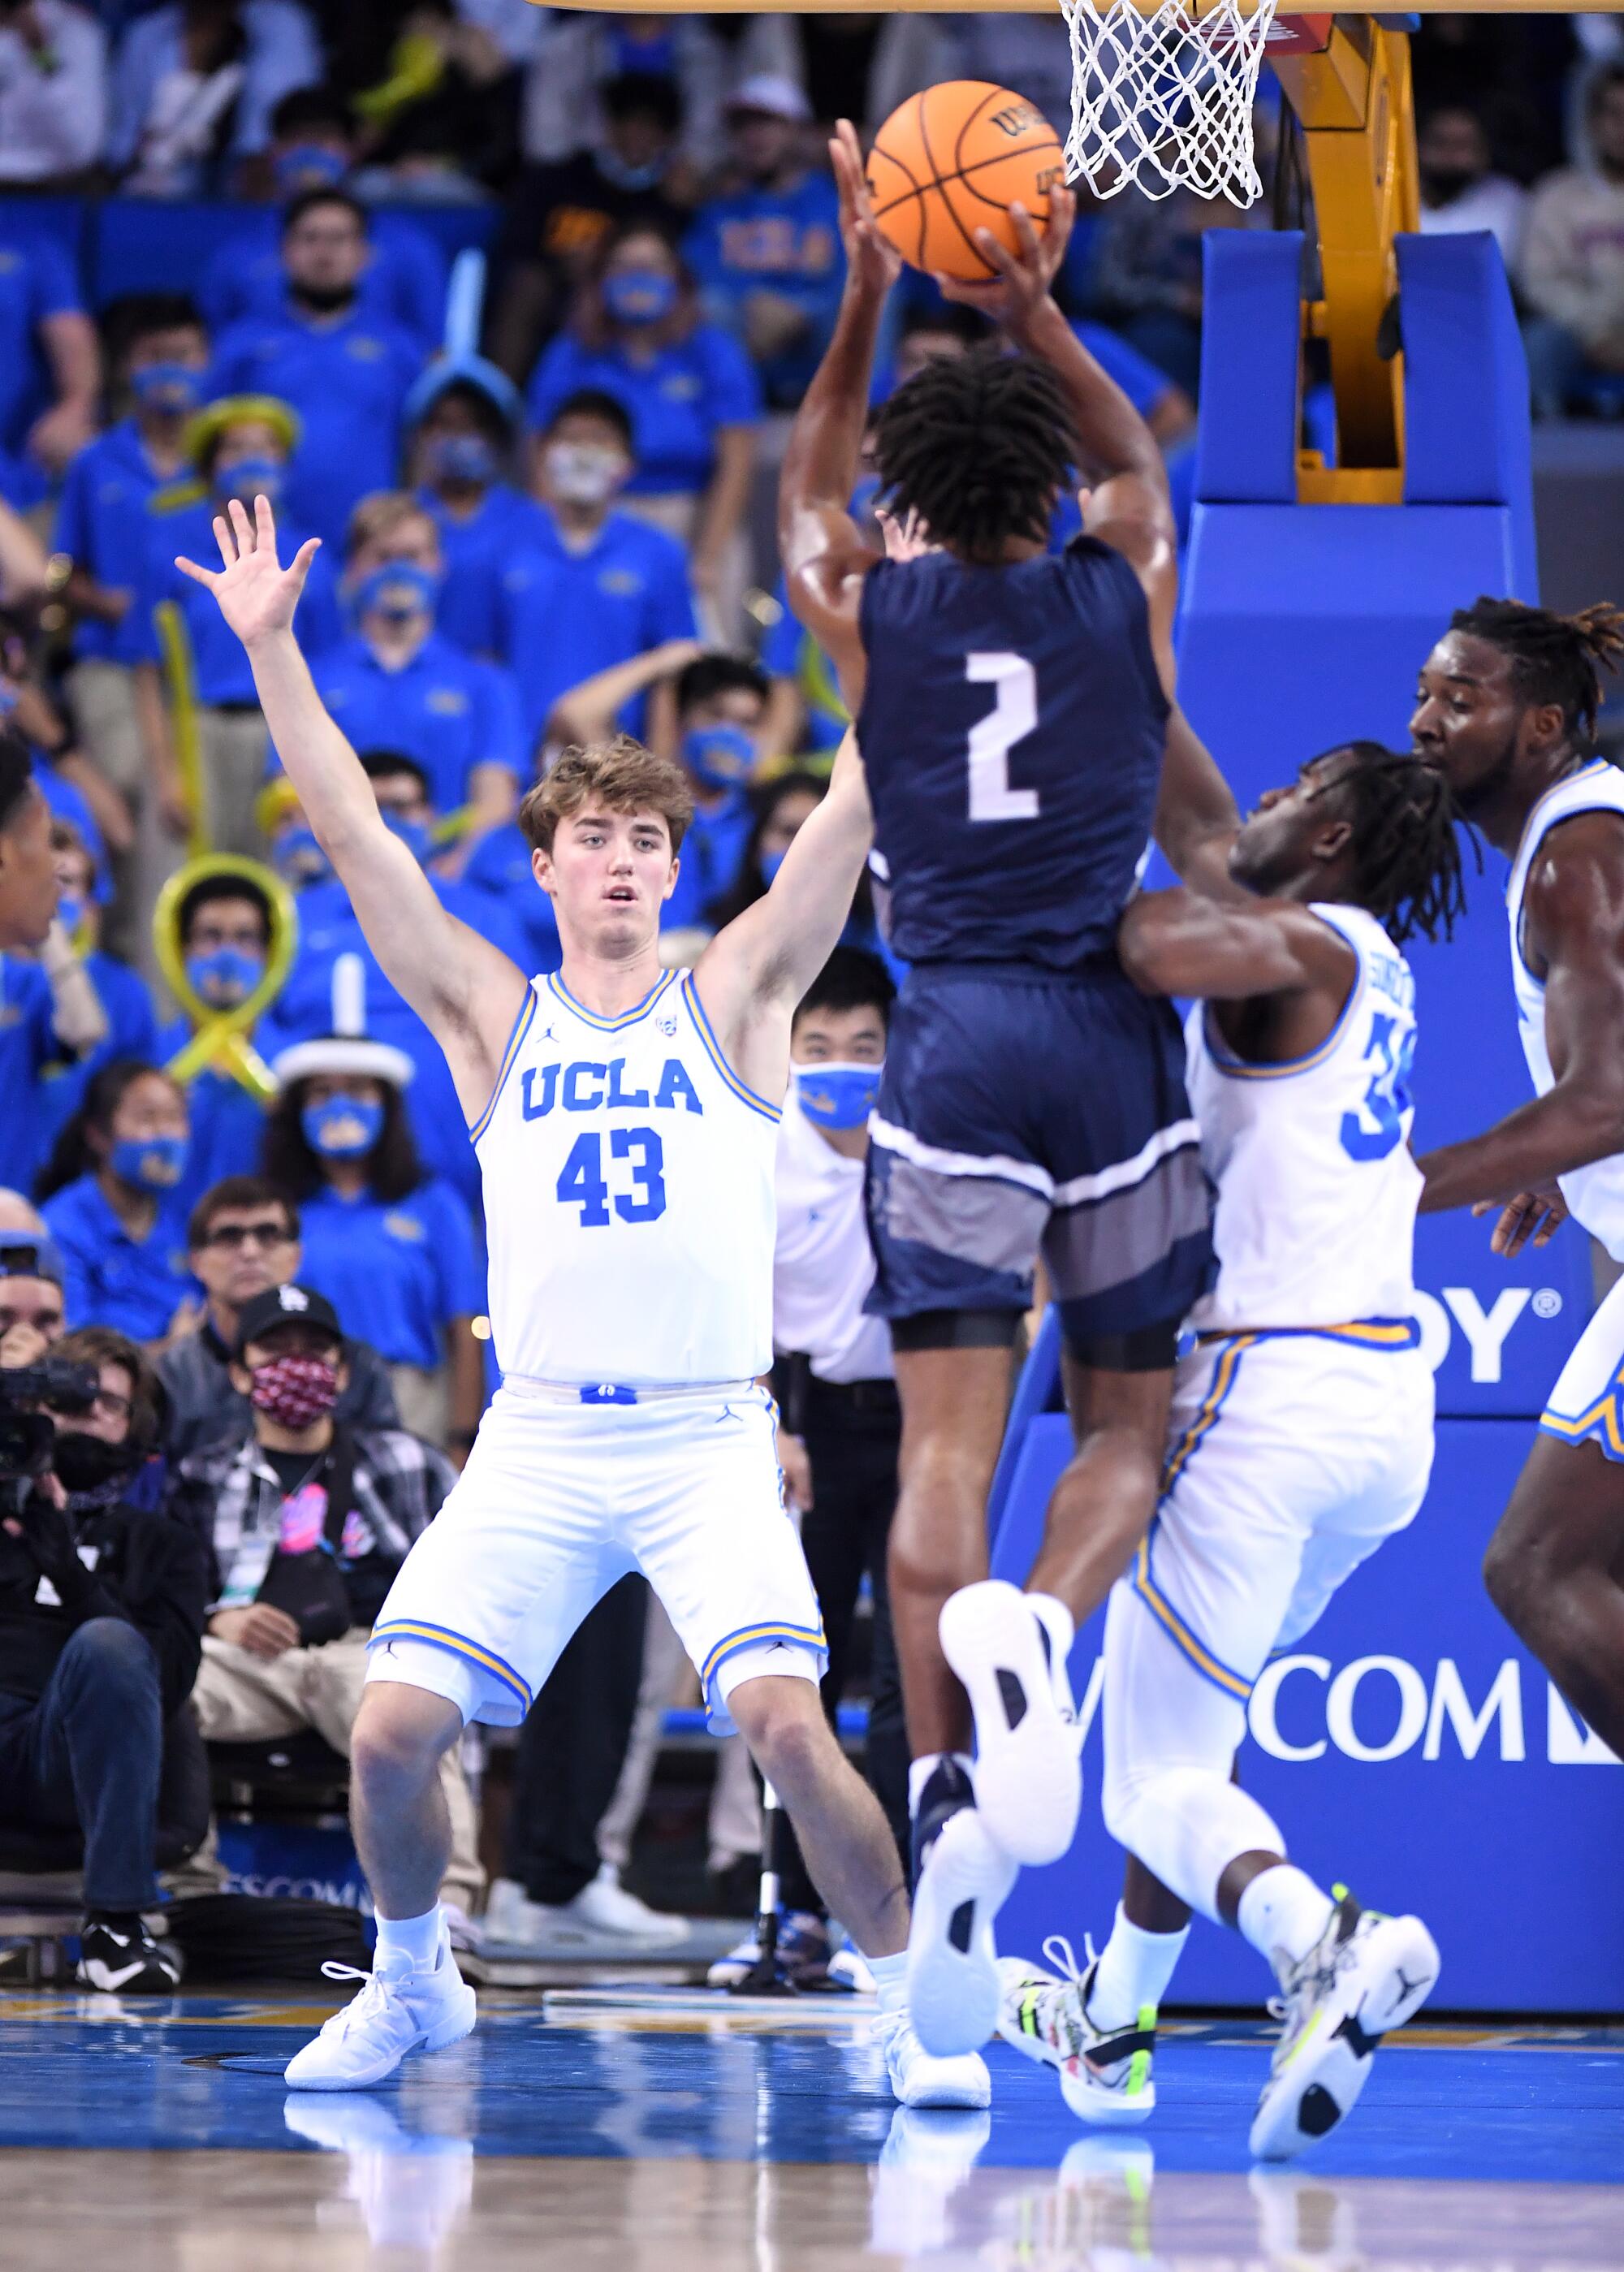 UCLA's Russell Stong contests a drive during a game against Northern Florida at Pauley Pavilion 